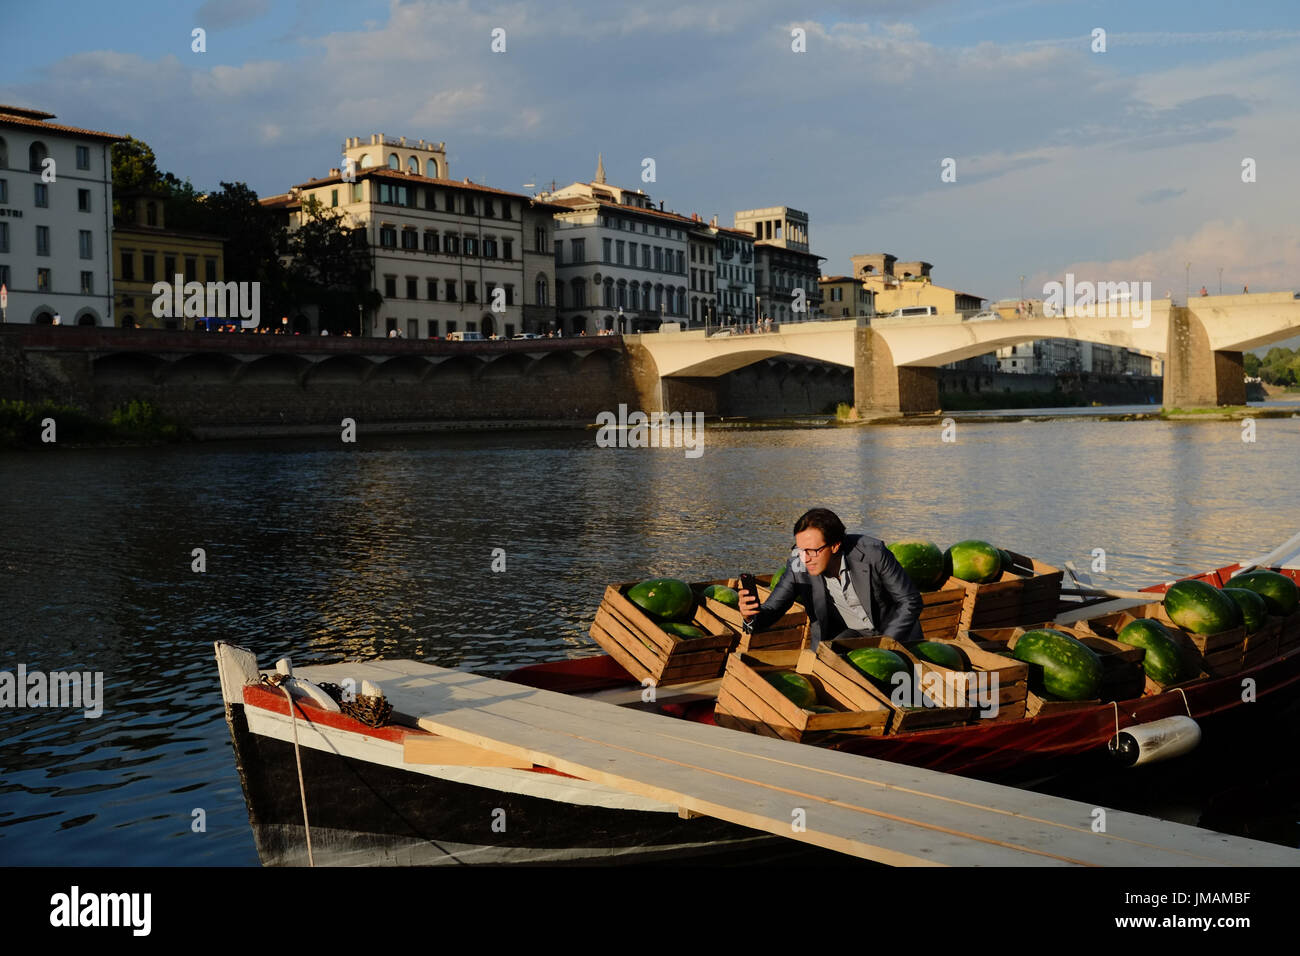 Florence, Italy. 26th July, 2017. Nardella doing selfies on the fruit boat. Mr Nardella, Florence mayor just opened up a new walking path on the left side of the Arno river which has been possible due to the low water level of the summer season. Florence,Italy. Credit: lorenzo codacci/Alamy Live News Stock Photo